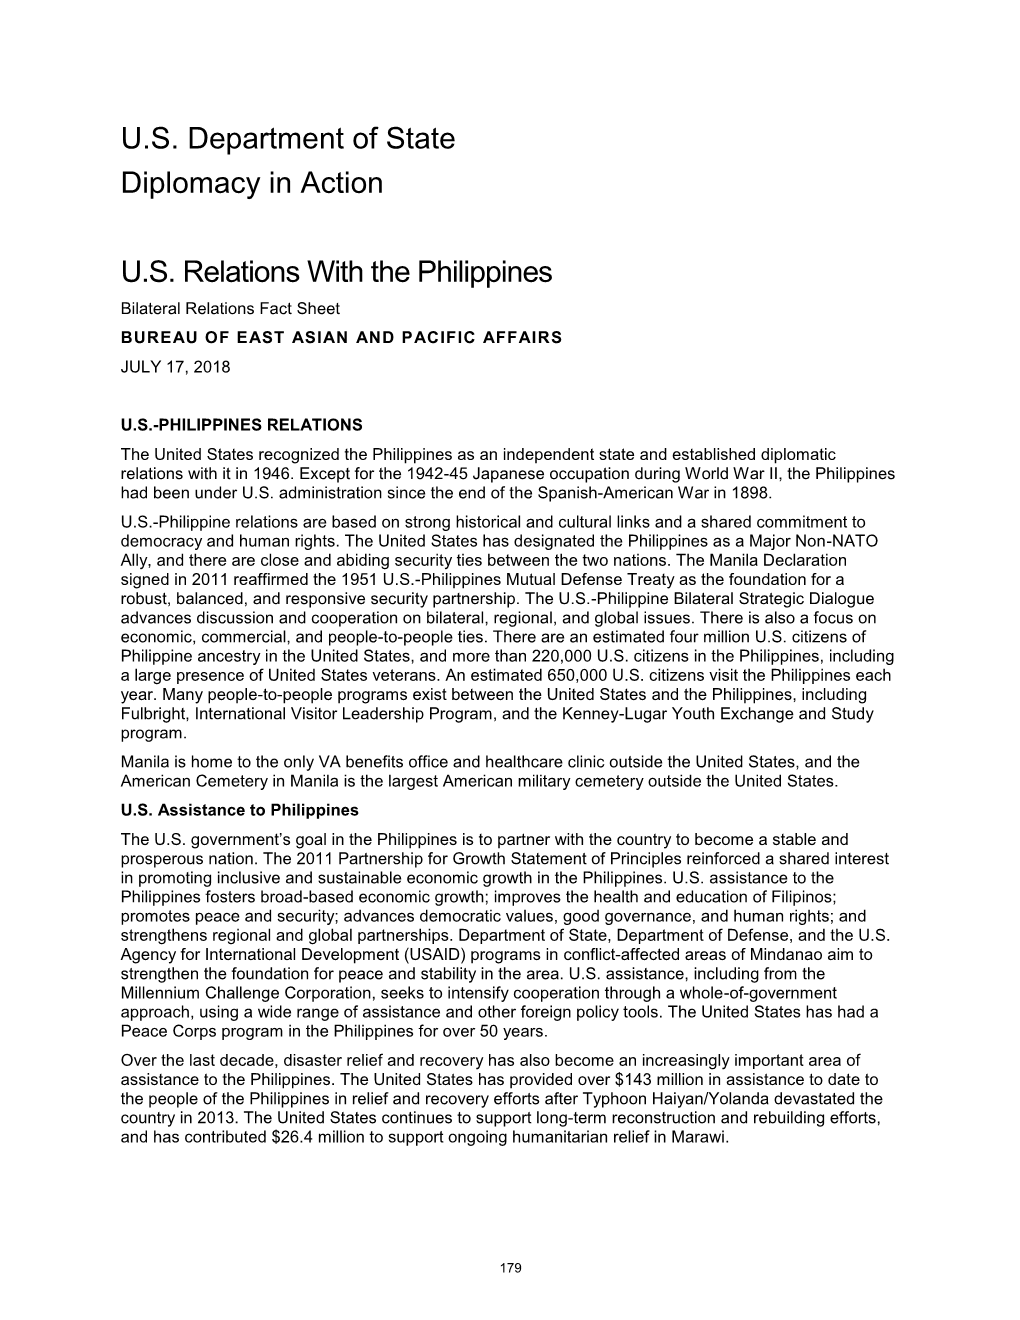 Philippines Bilateral Relations Fact Sheet BUREAU of EAST ASIAN and PACIFIC AFFAIRS JULY 17, 2018